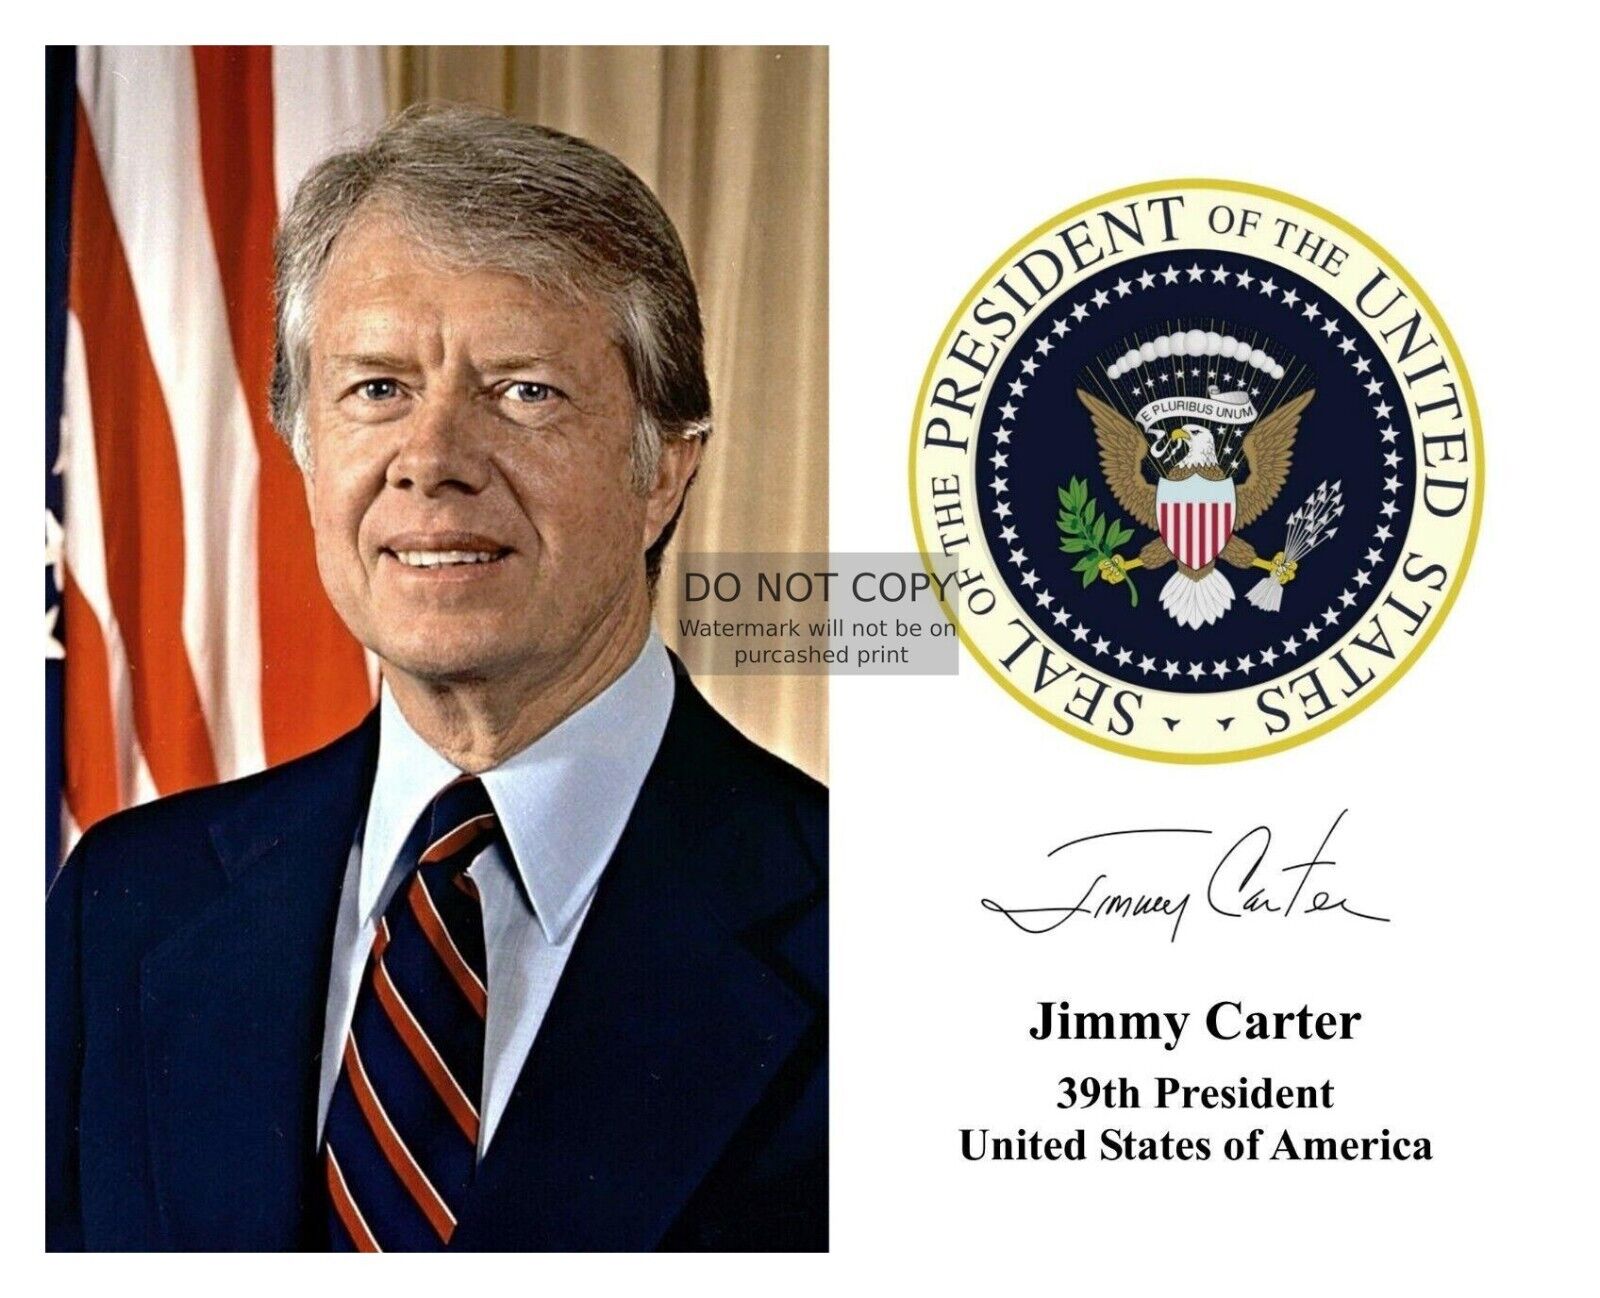 PRESIDENT JIMMY CARTER PRESIDENTIAL SEAL AUTOGRAPHED 8X10 PHOTOGRAPH